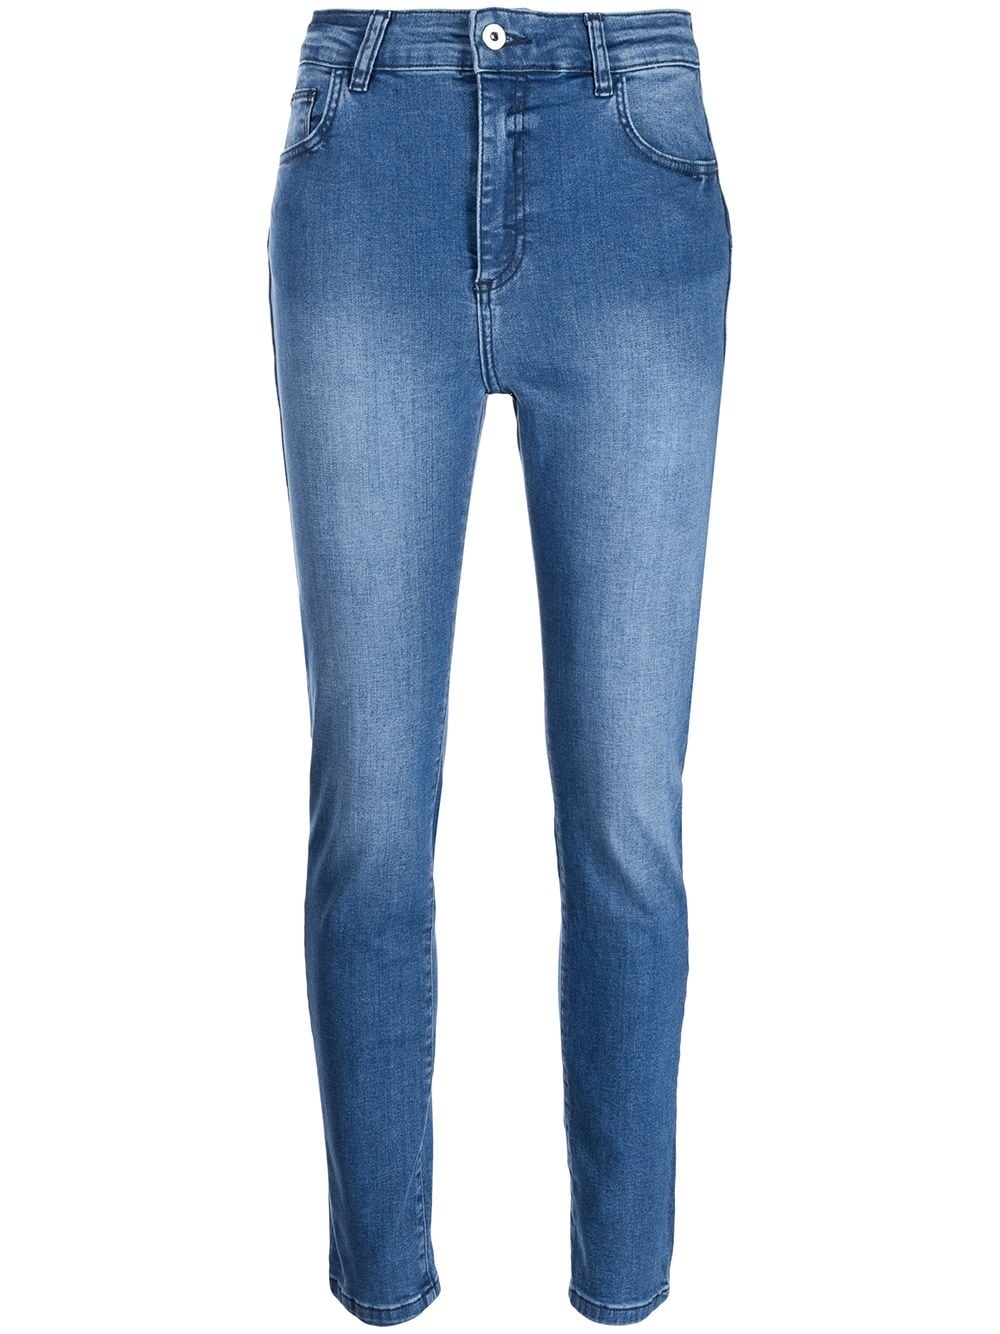 TWINSET faded-effect jeans - Blue von TWINSET